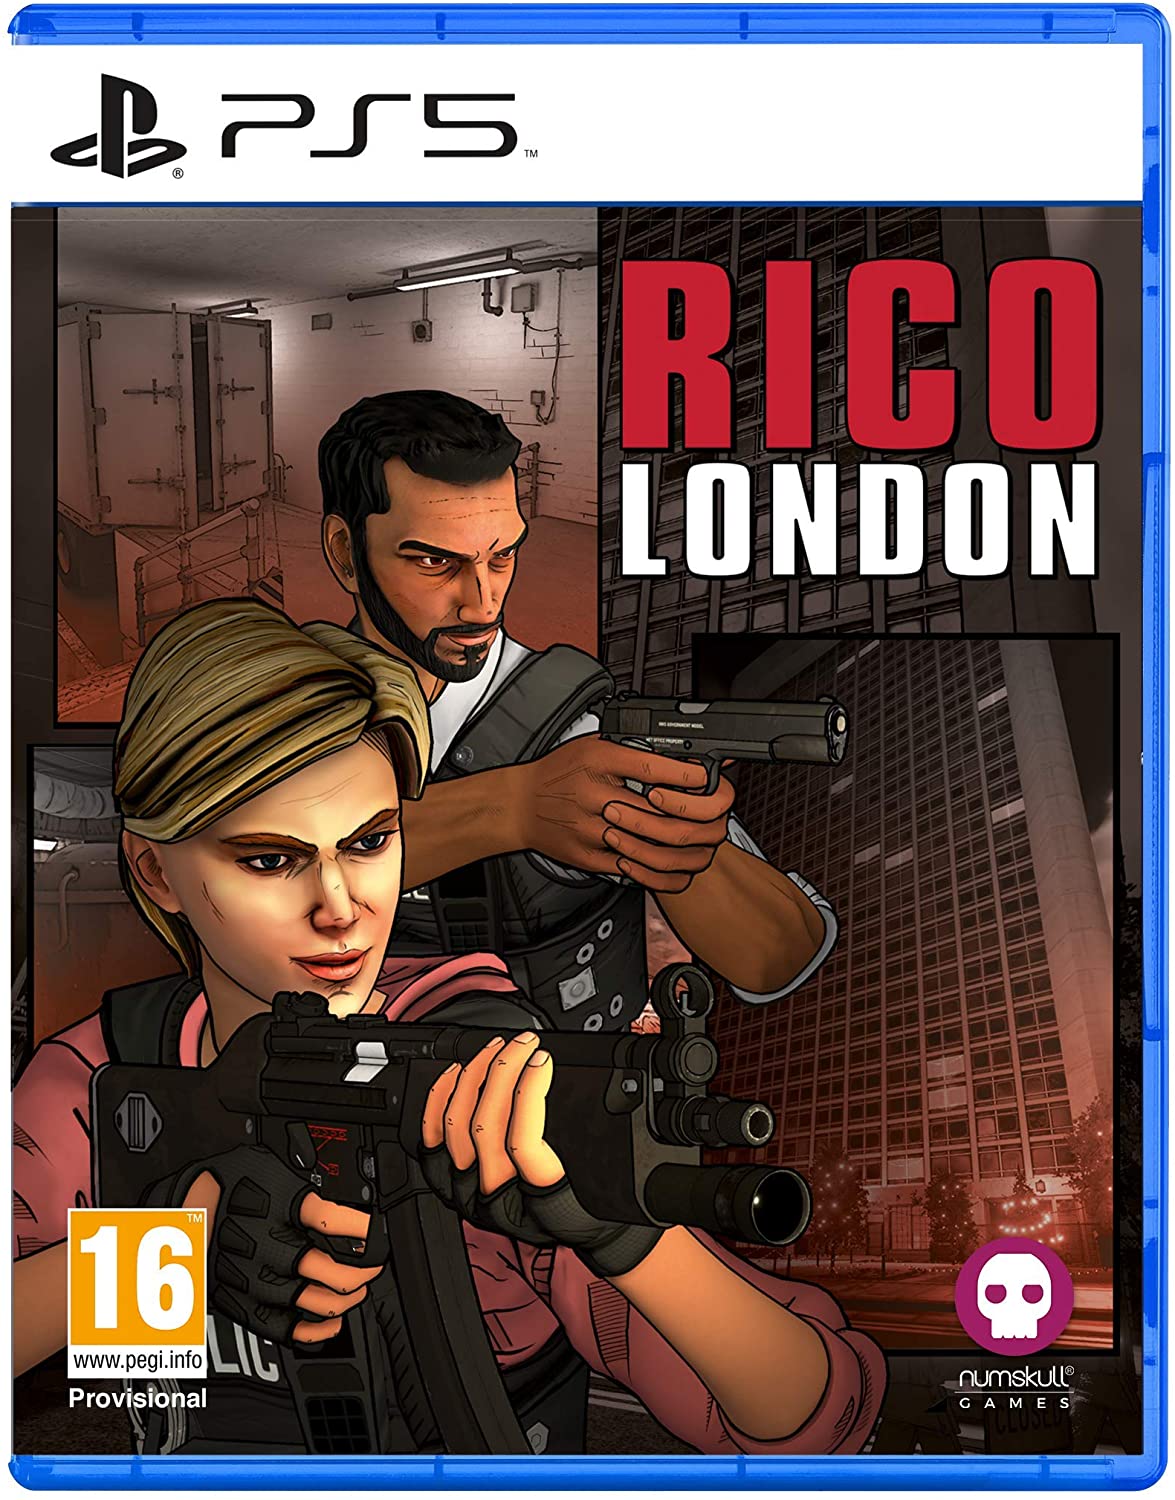 rico london ps4 review